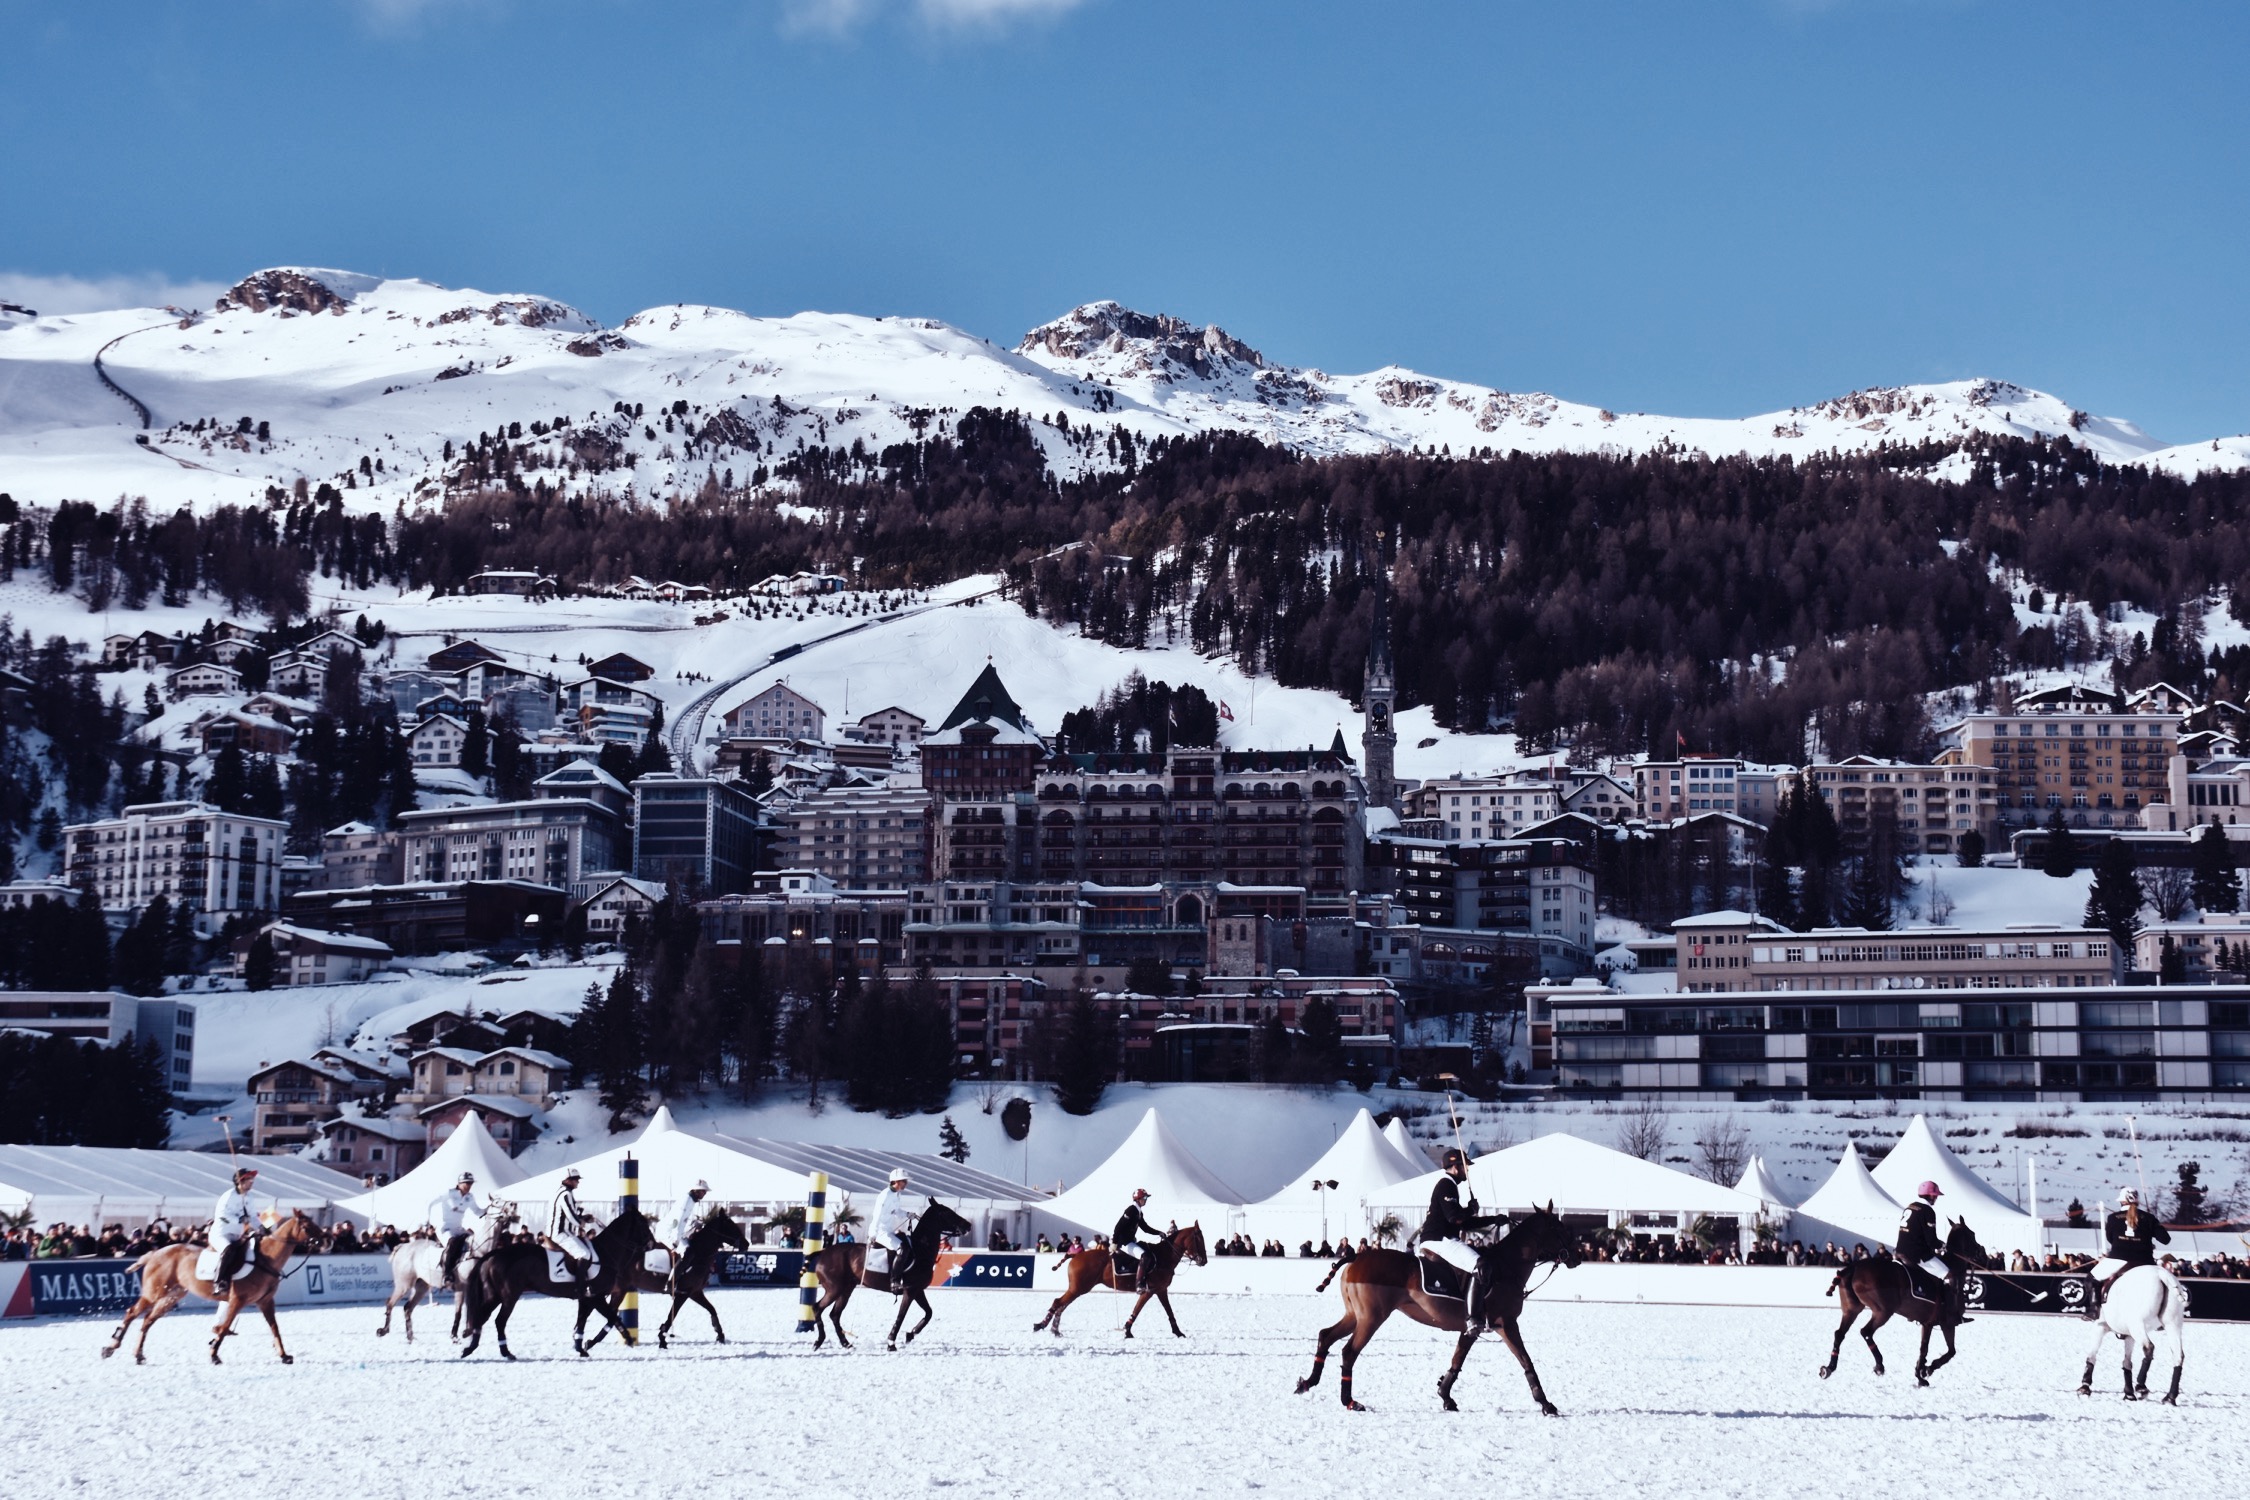 The view over St. Moritz during the Snow Polo World Cup on the frozen lake